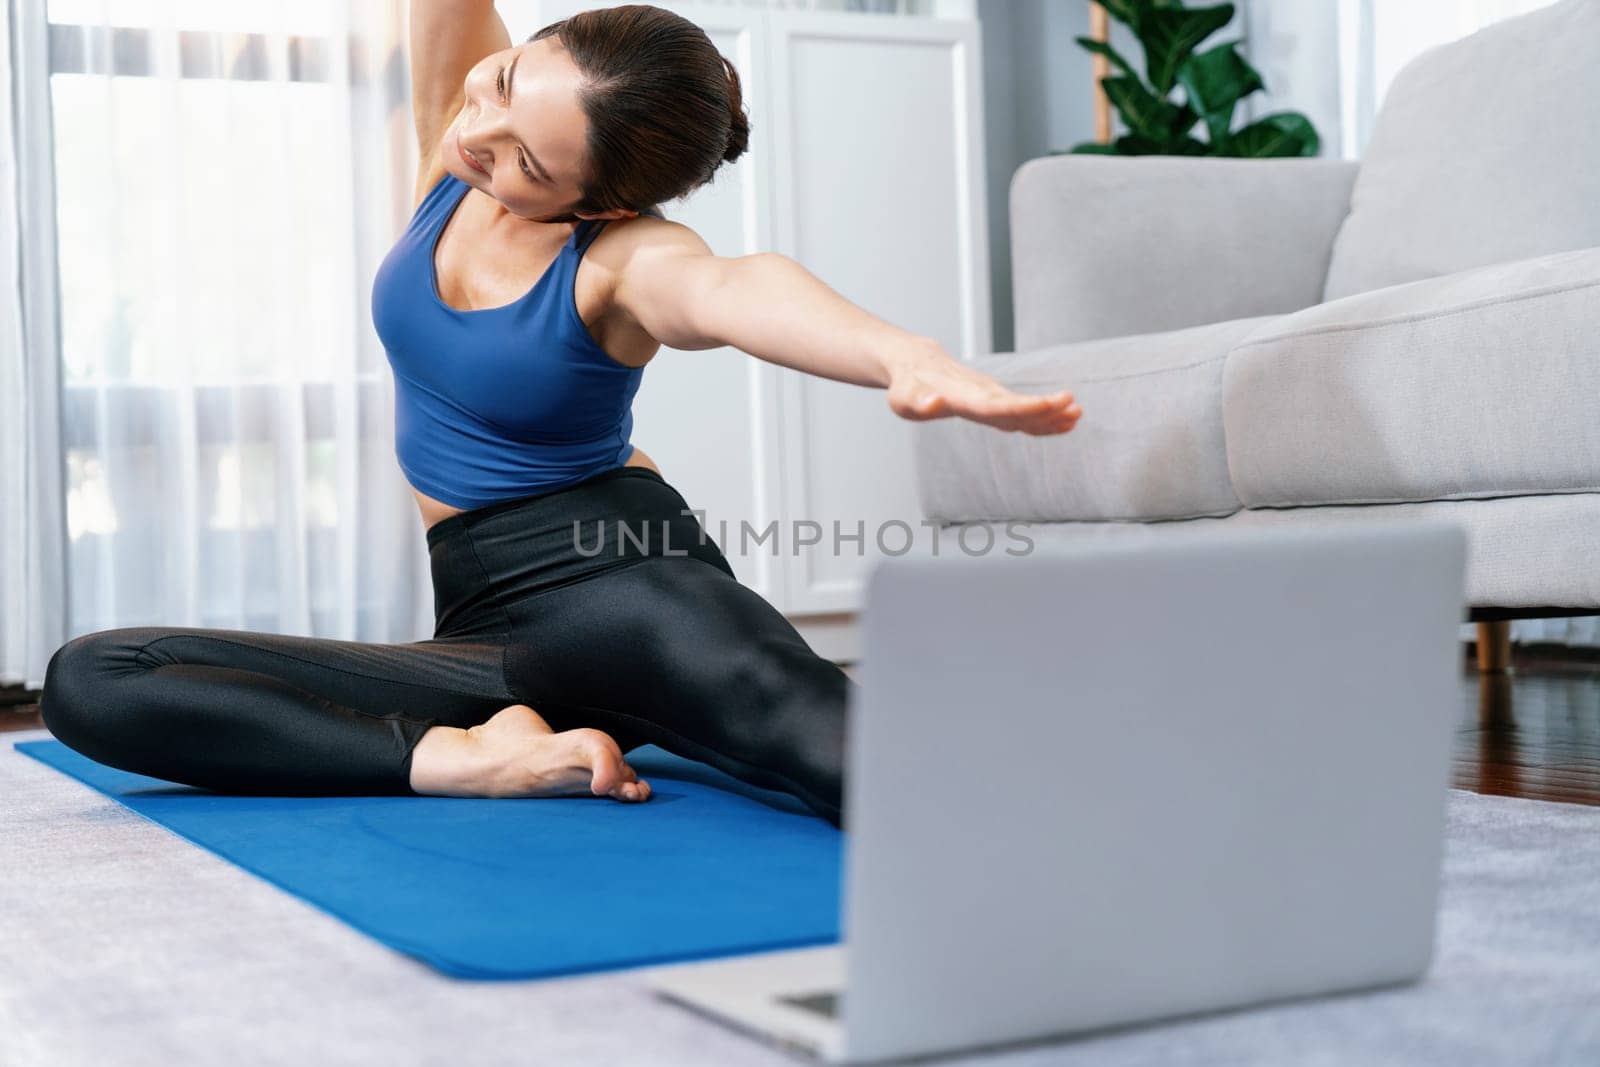 Focused laptop on the floor showing online exercise training video, while sporty athletic woman concentrate on warm-up and stretching routine in blurred background. Vigorous